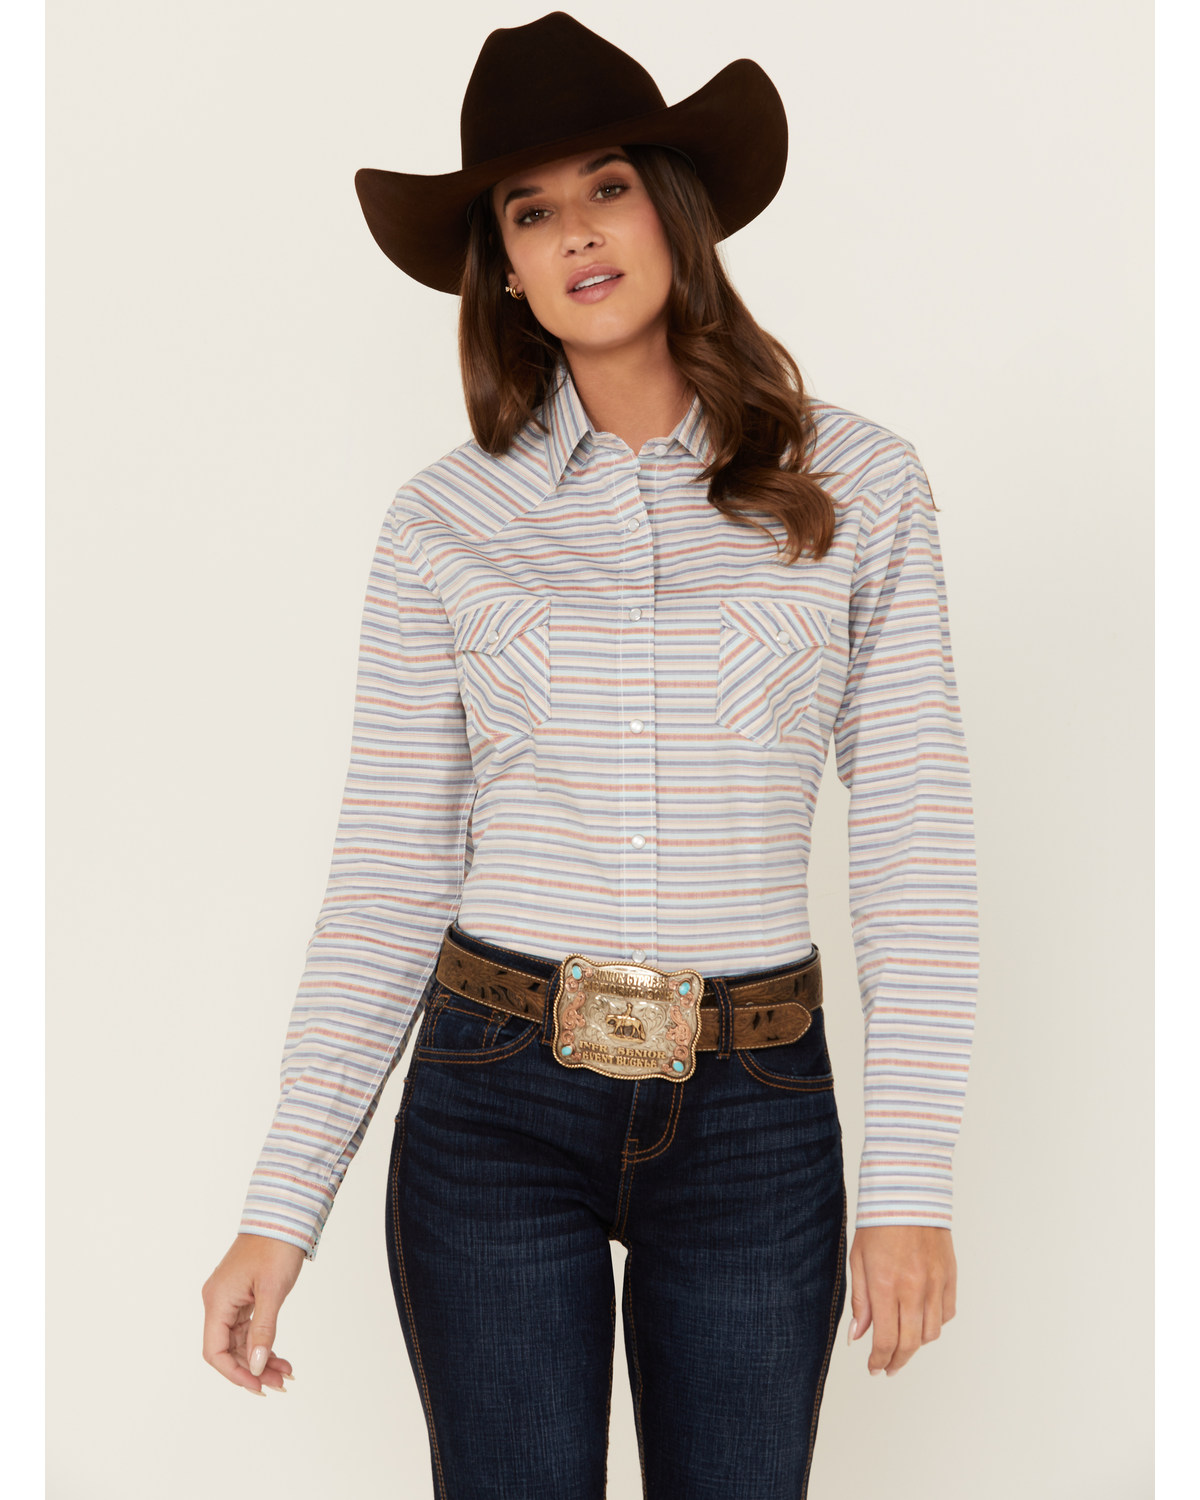 Rough Stock by Panhandle Women's Striped Long Sleeve Pearl Snap Western Shirt